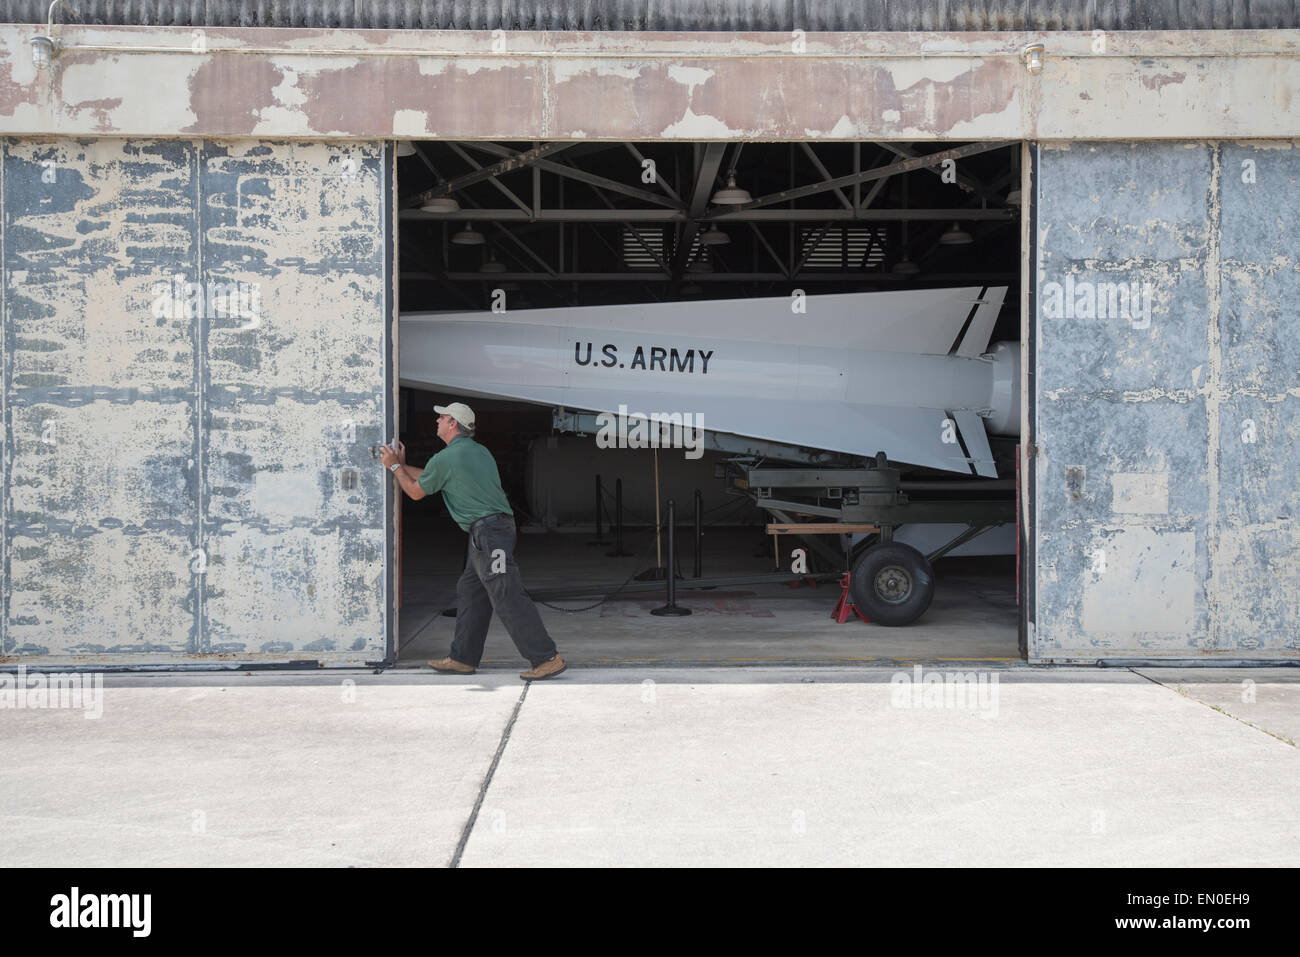 A park ranger slides open the doors of an old missile storage shed, revealing the Nike missile that once guarded the US Stock Photo